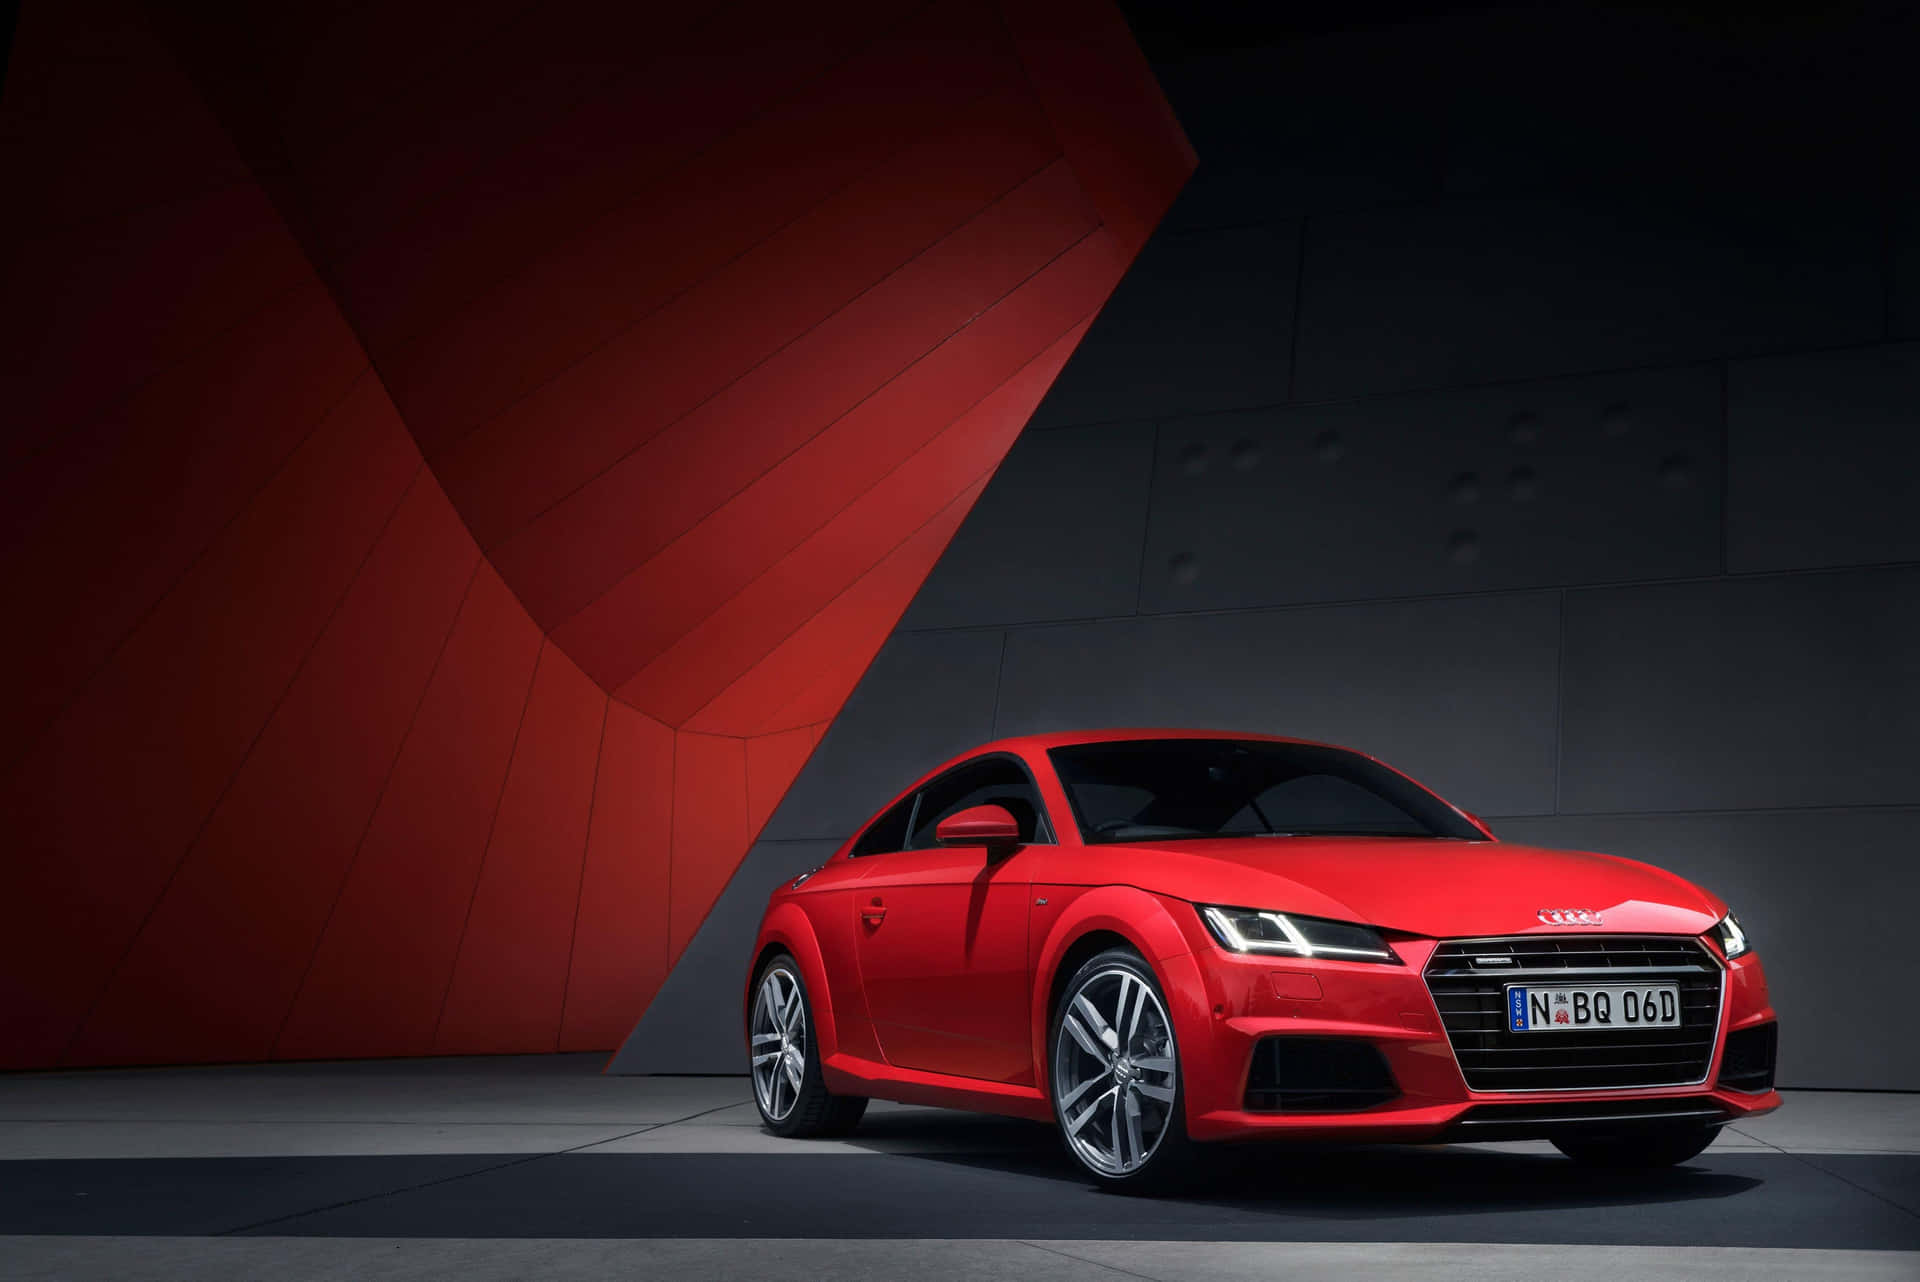 Audi TT Sport Coupe on the Road Wallpaper